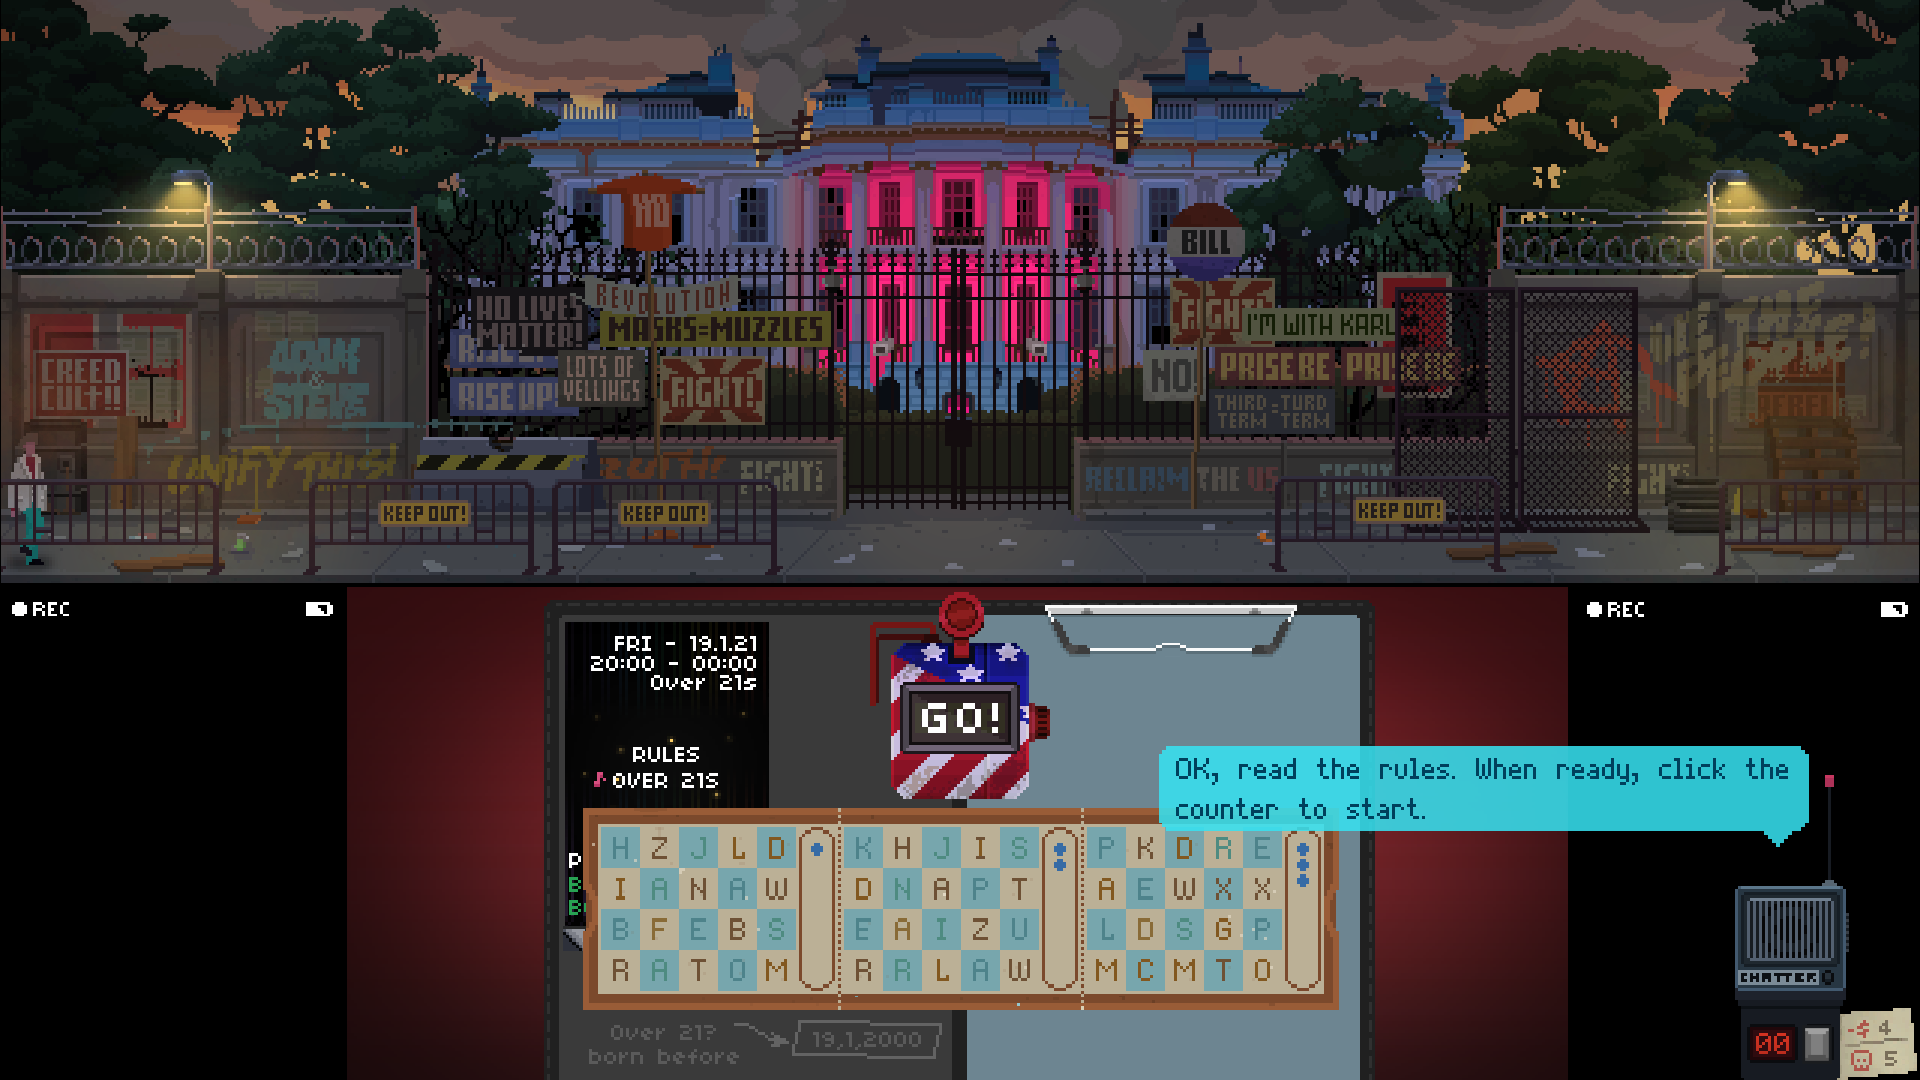 A Not Tonight 2 screenshot showing a barricaded White House.